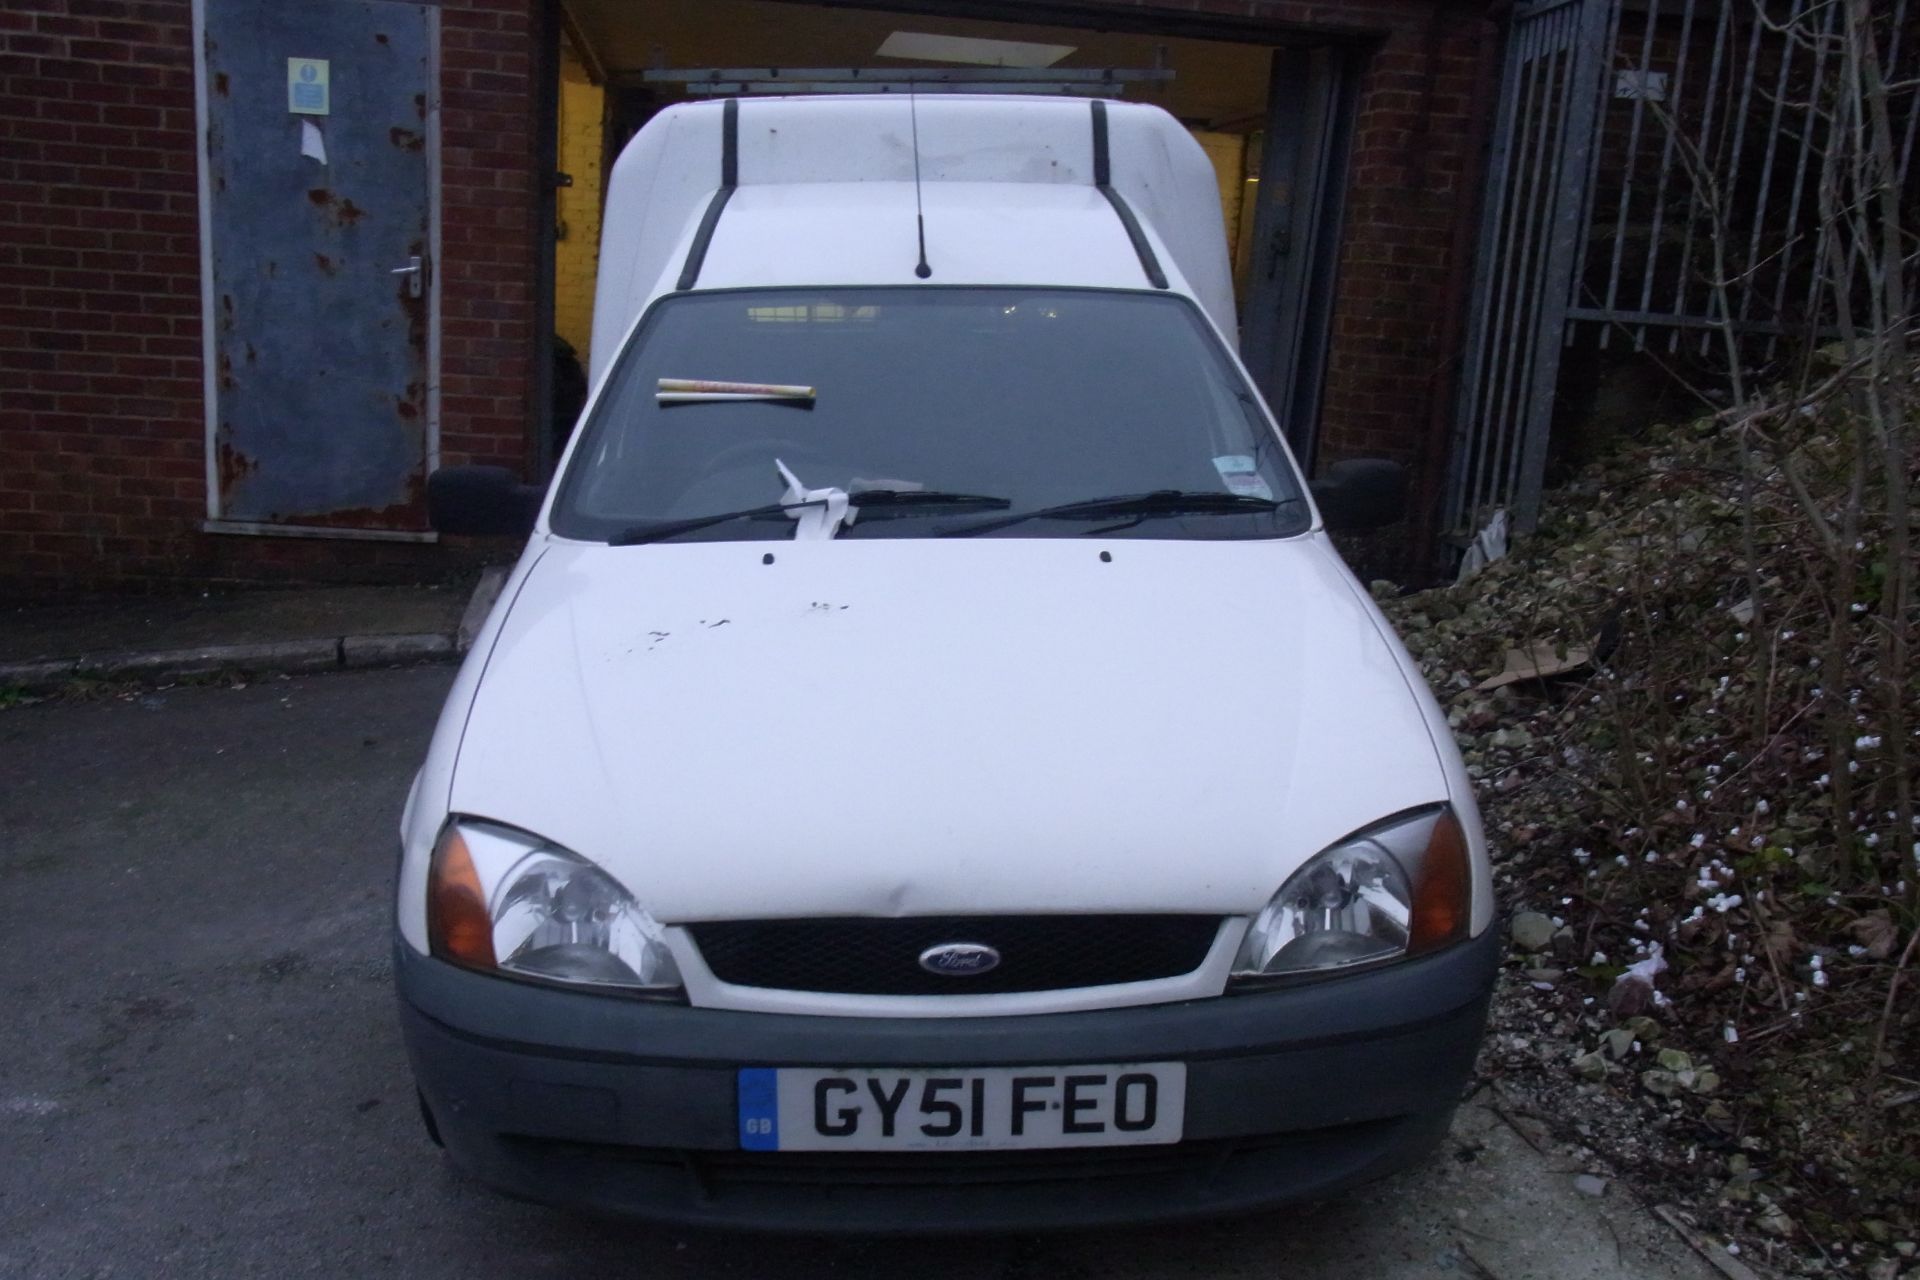 GY51 FEO Ford Fiesta Courier 50 TD with V5 - THIS VEHICLE IS SUBJECT TO VAT